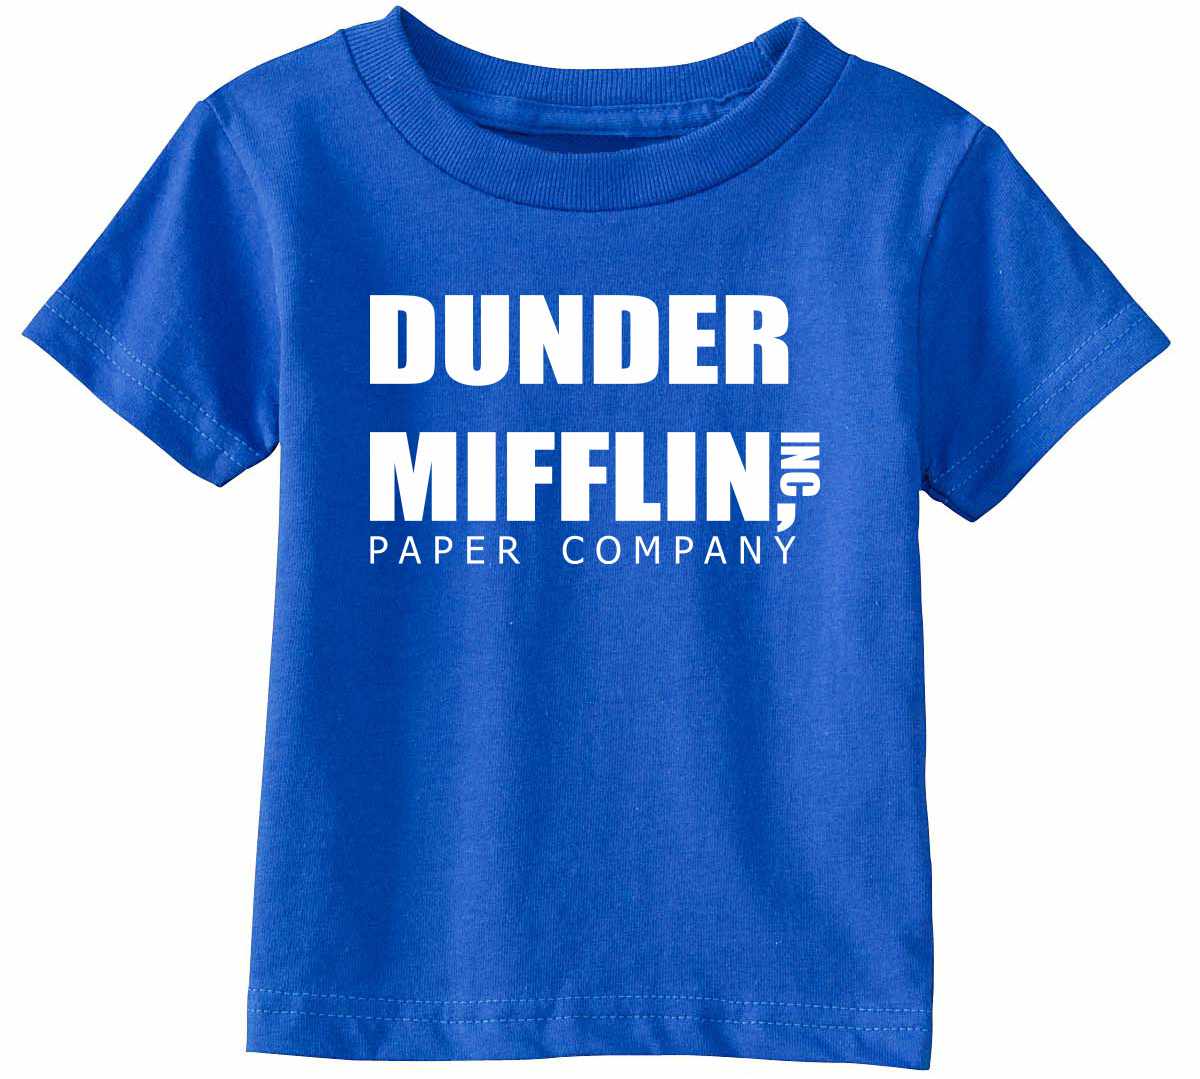 Dunder Mifflin Paper Company on Kids T-Shirt in 21 colors – South Horizon  T-Shirt Company